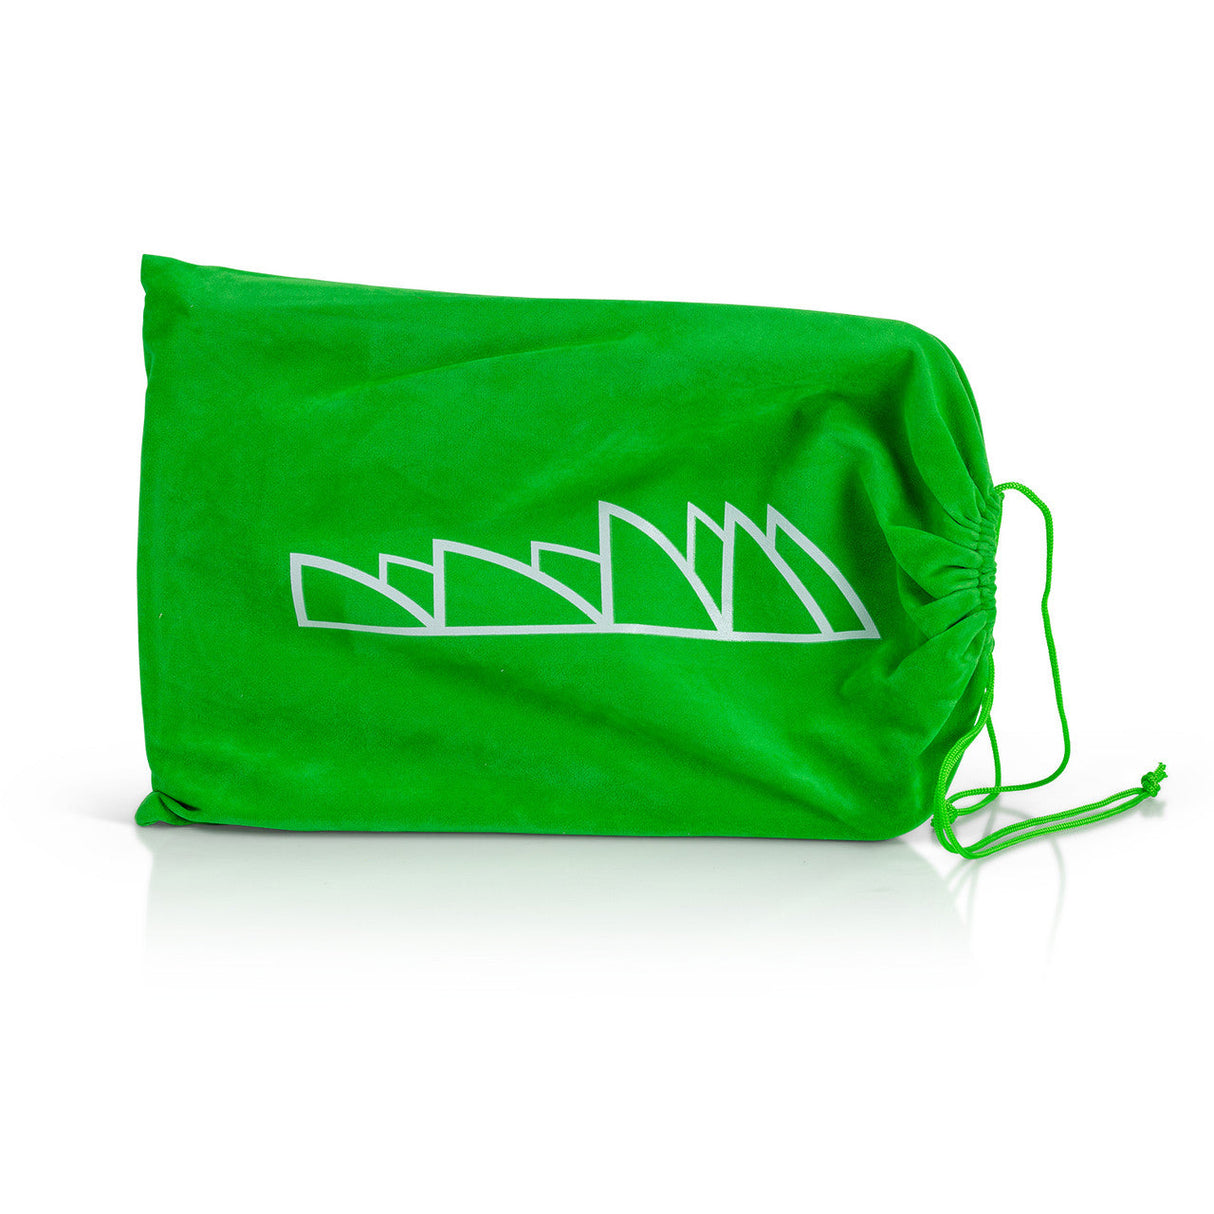 Piranha LED Rolling Tray in green with a drawstring bag, front view on a white background